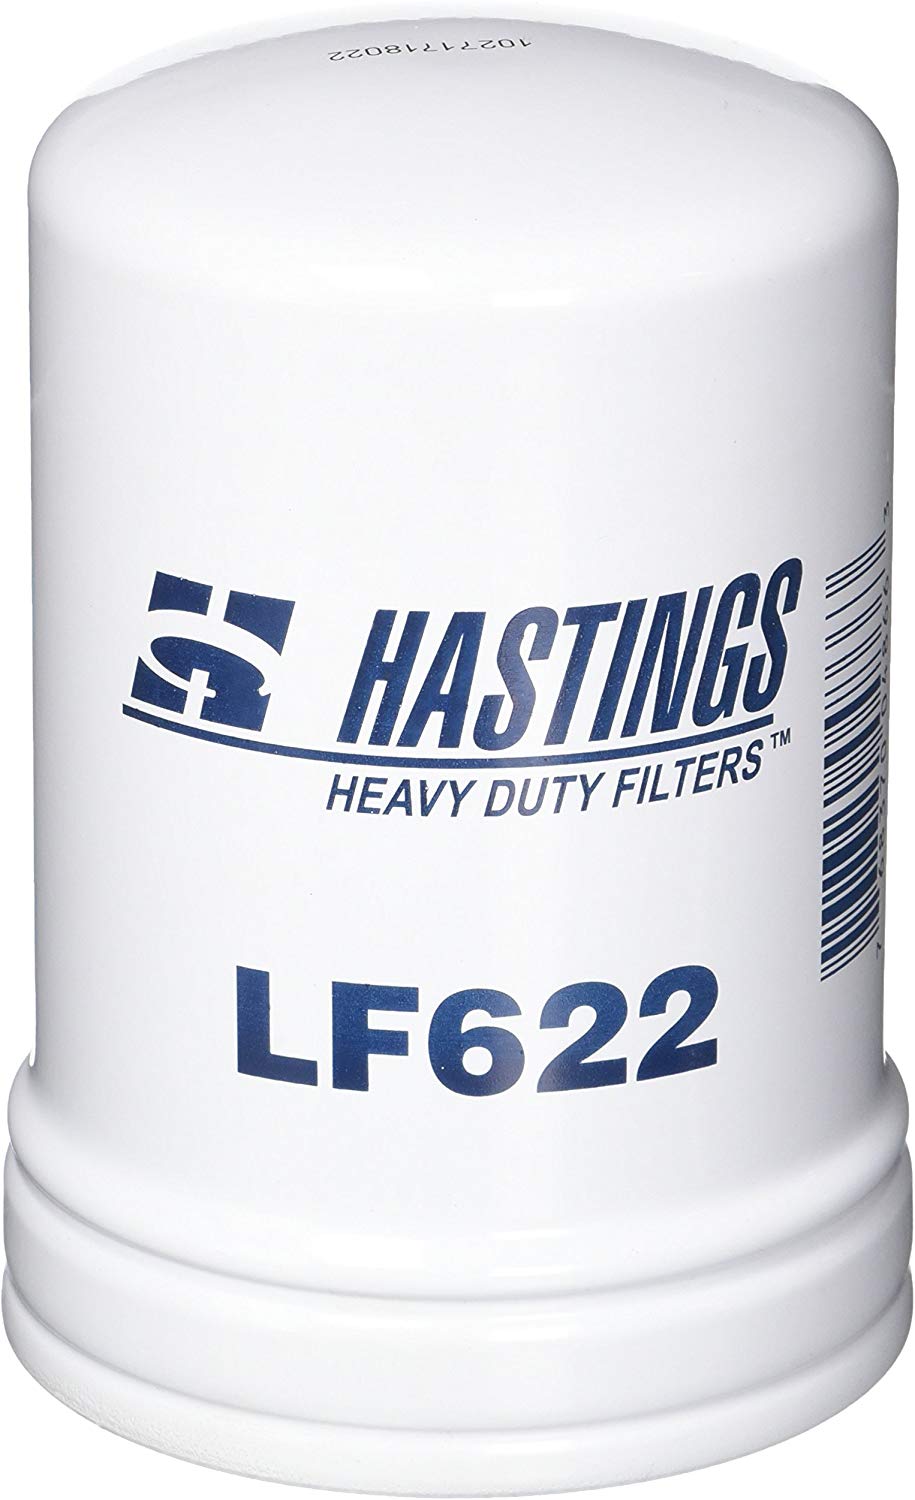 Hastings LF622 Lube Oil Spin-On Filter